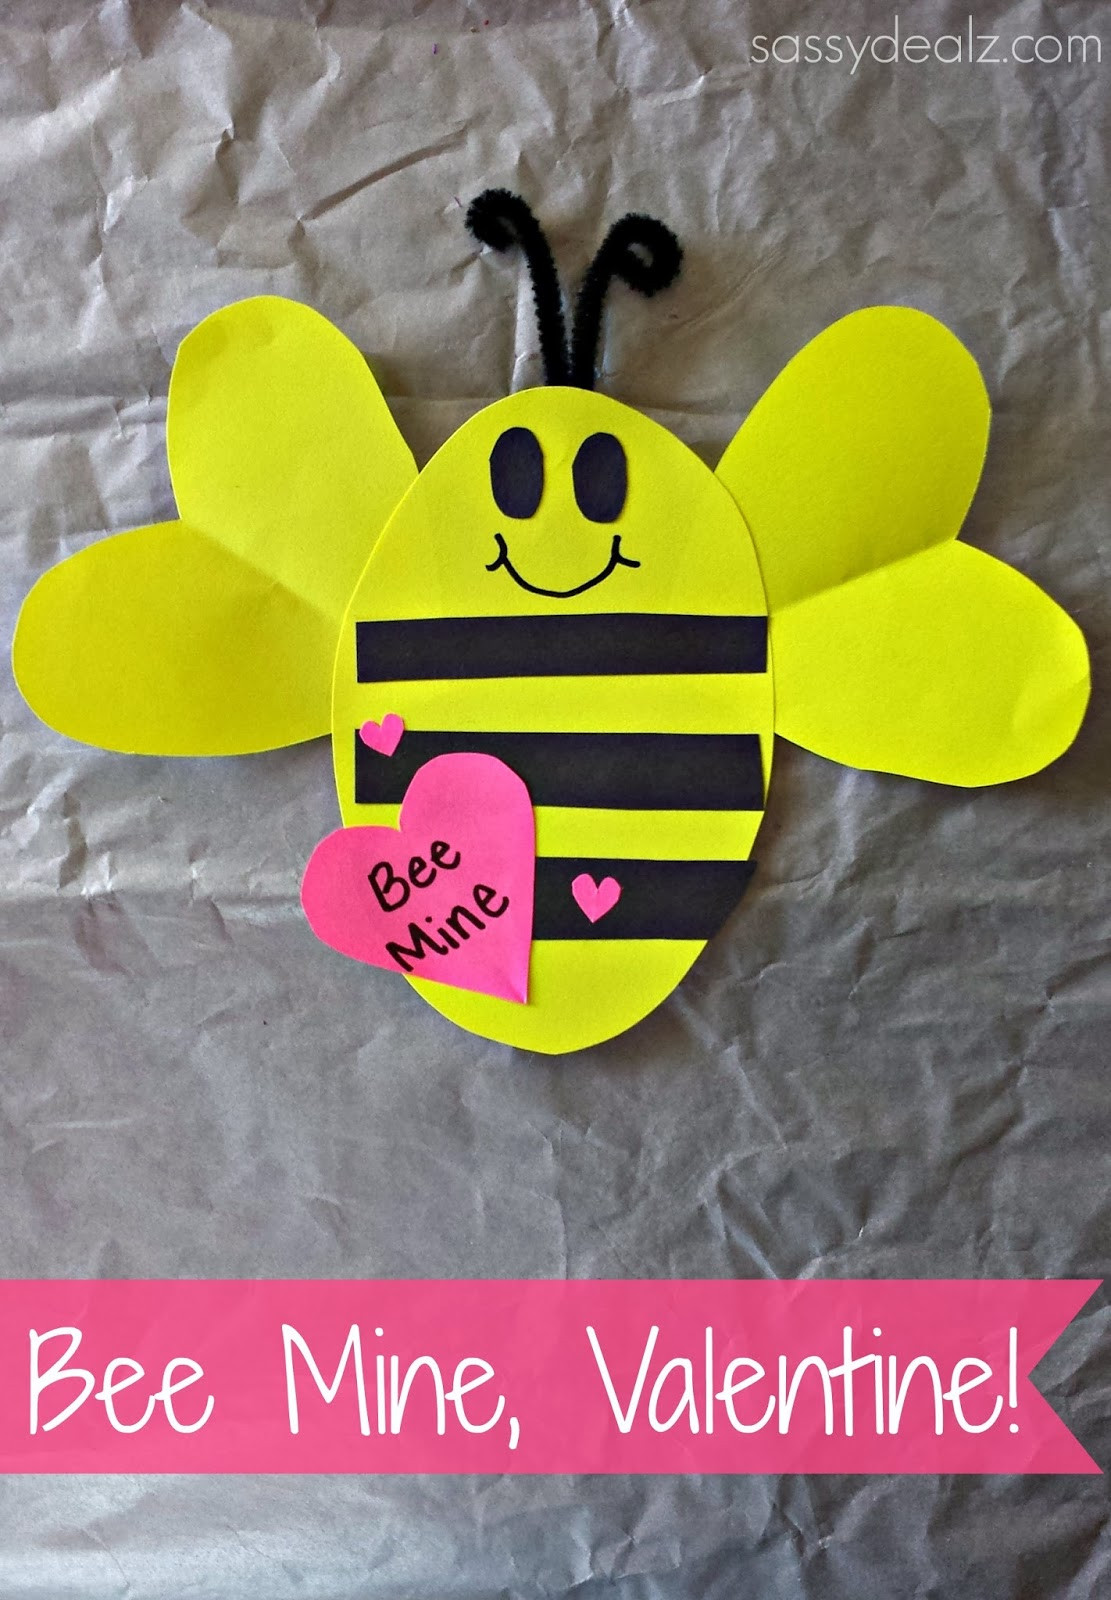 Valentines Day Craft Projects
 "Bee Mine" Valentine s Day Craft For Kids Crafty Morning